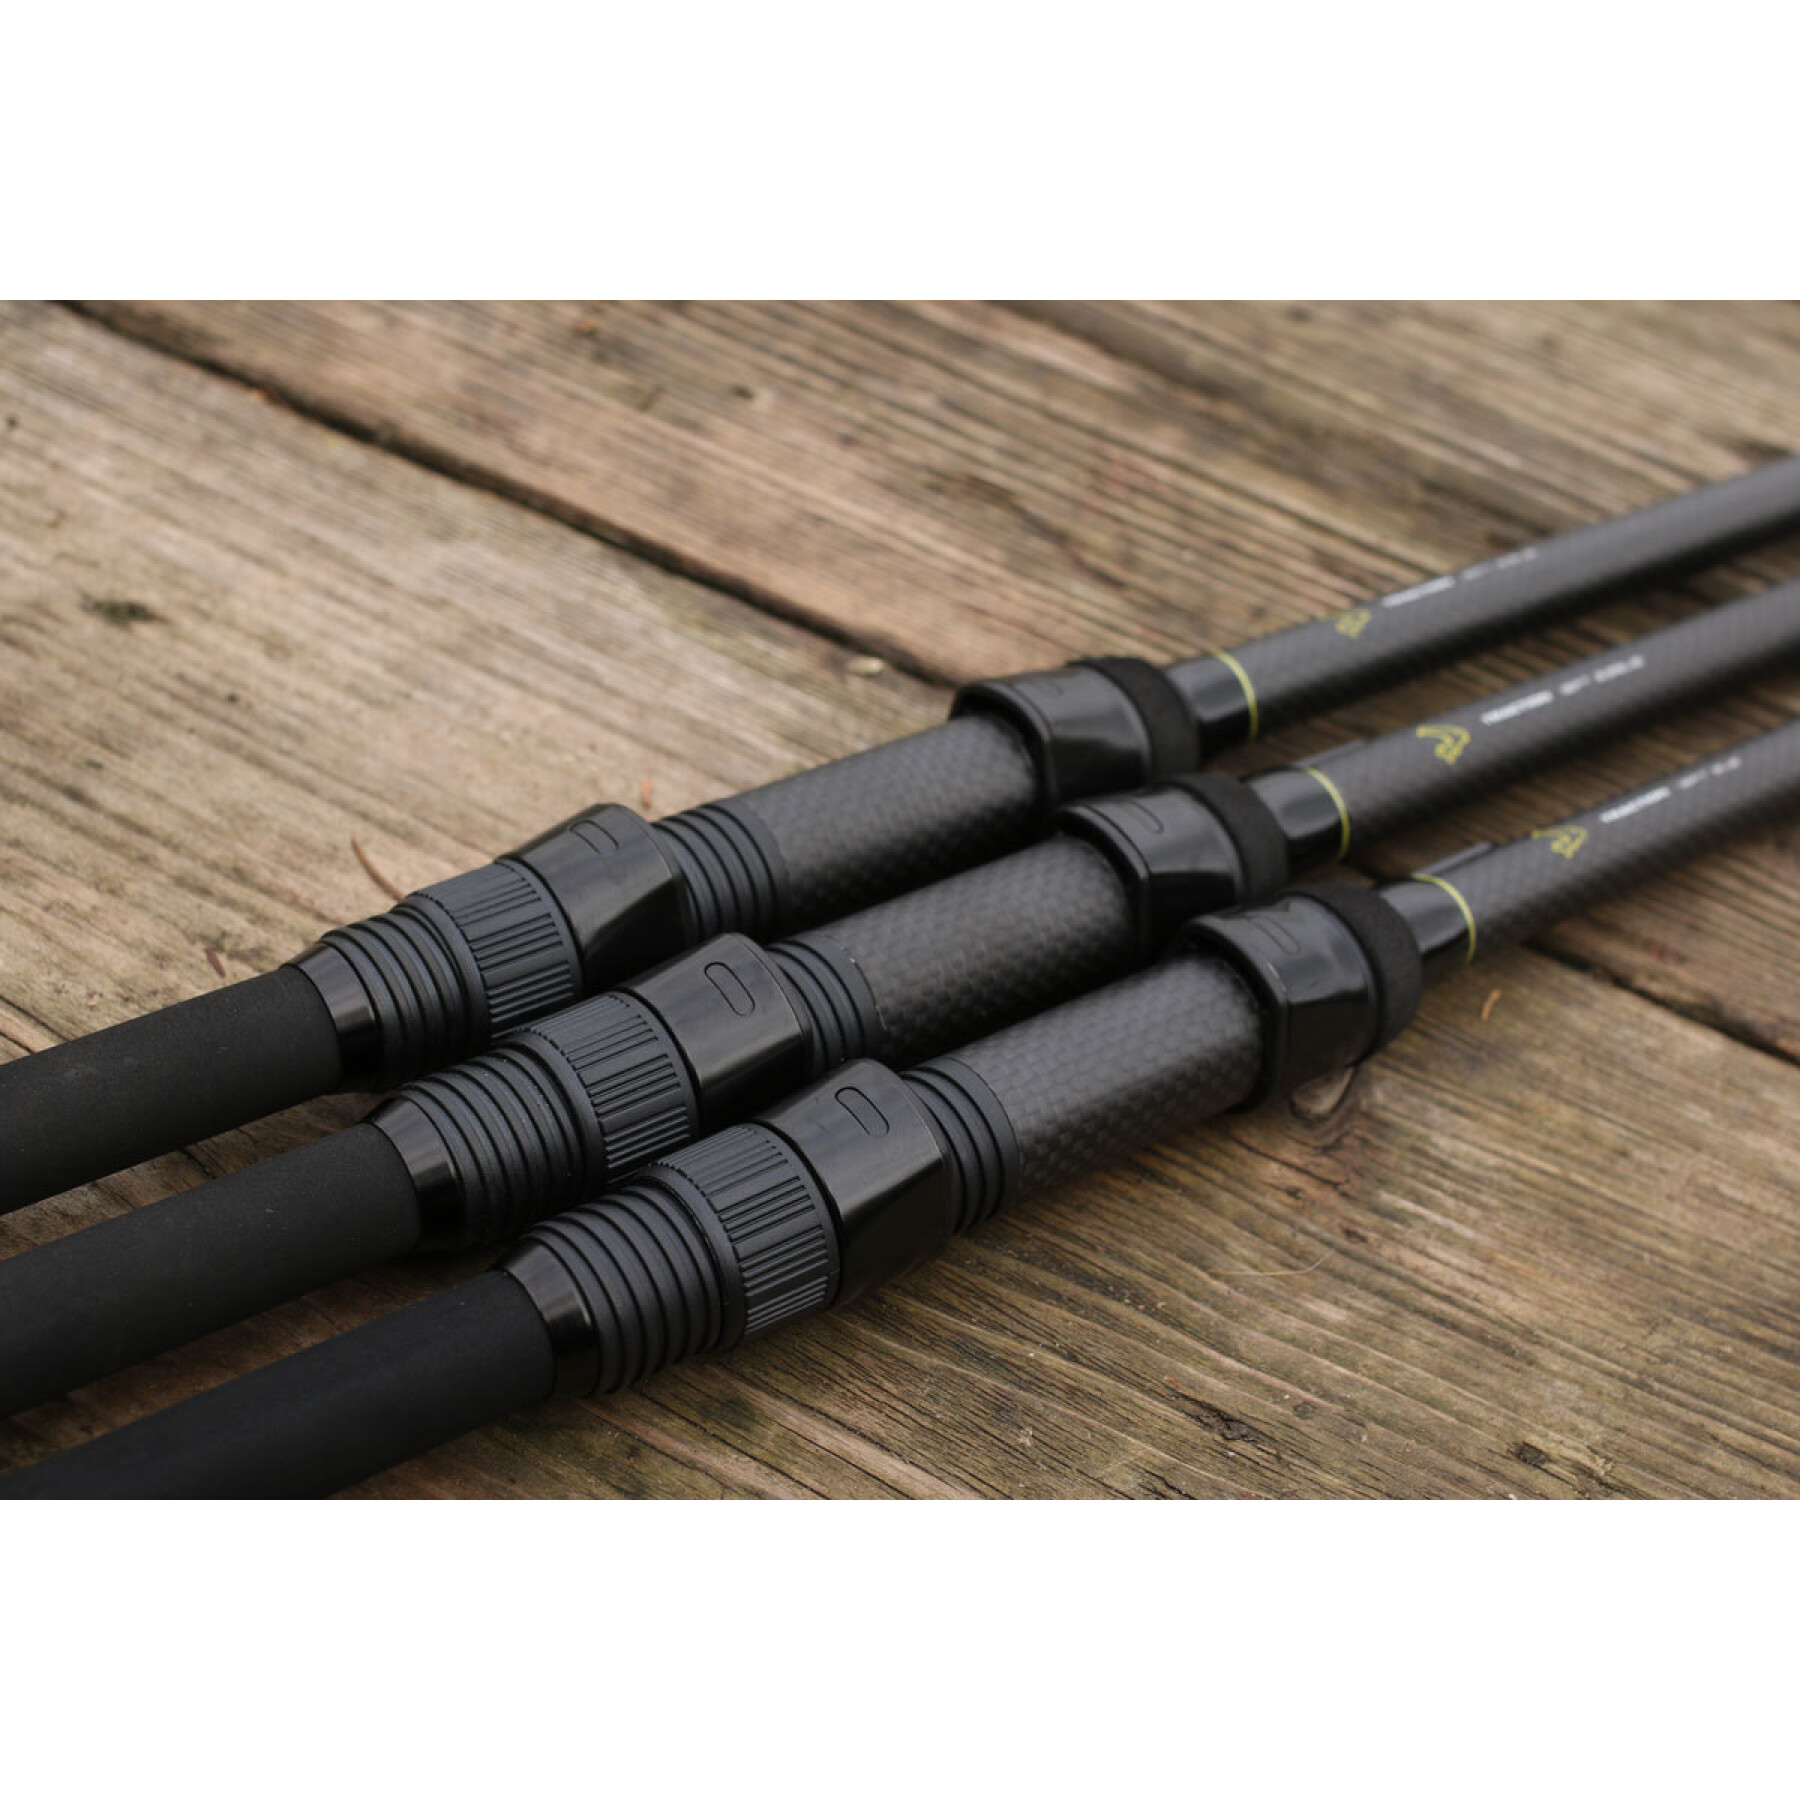 Pręty Avid Traction CT rod 12ft 2.5lb